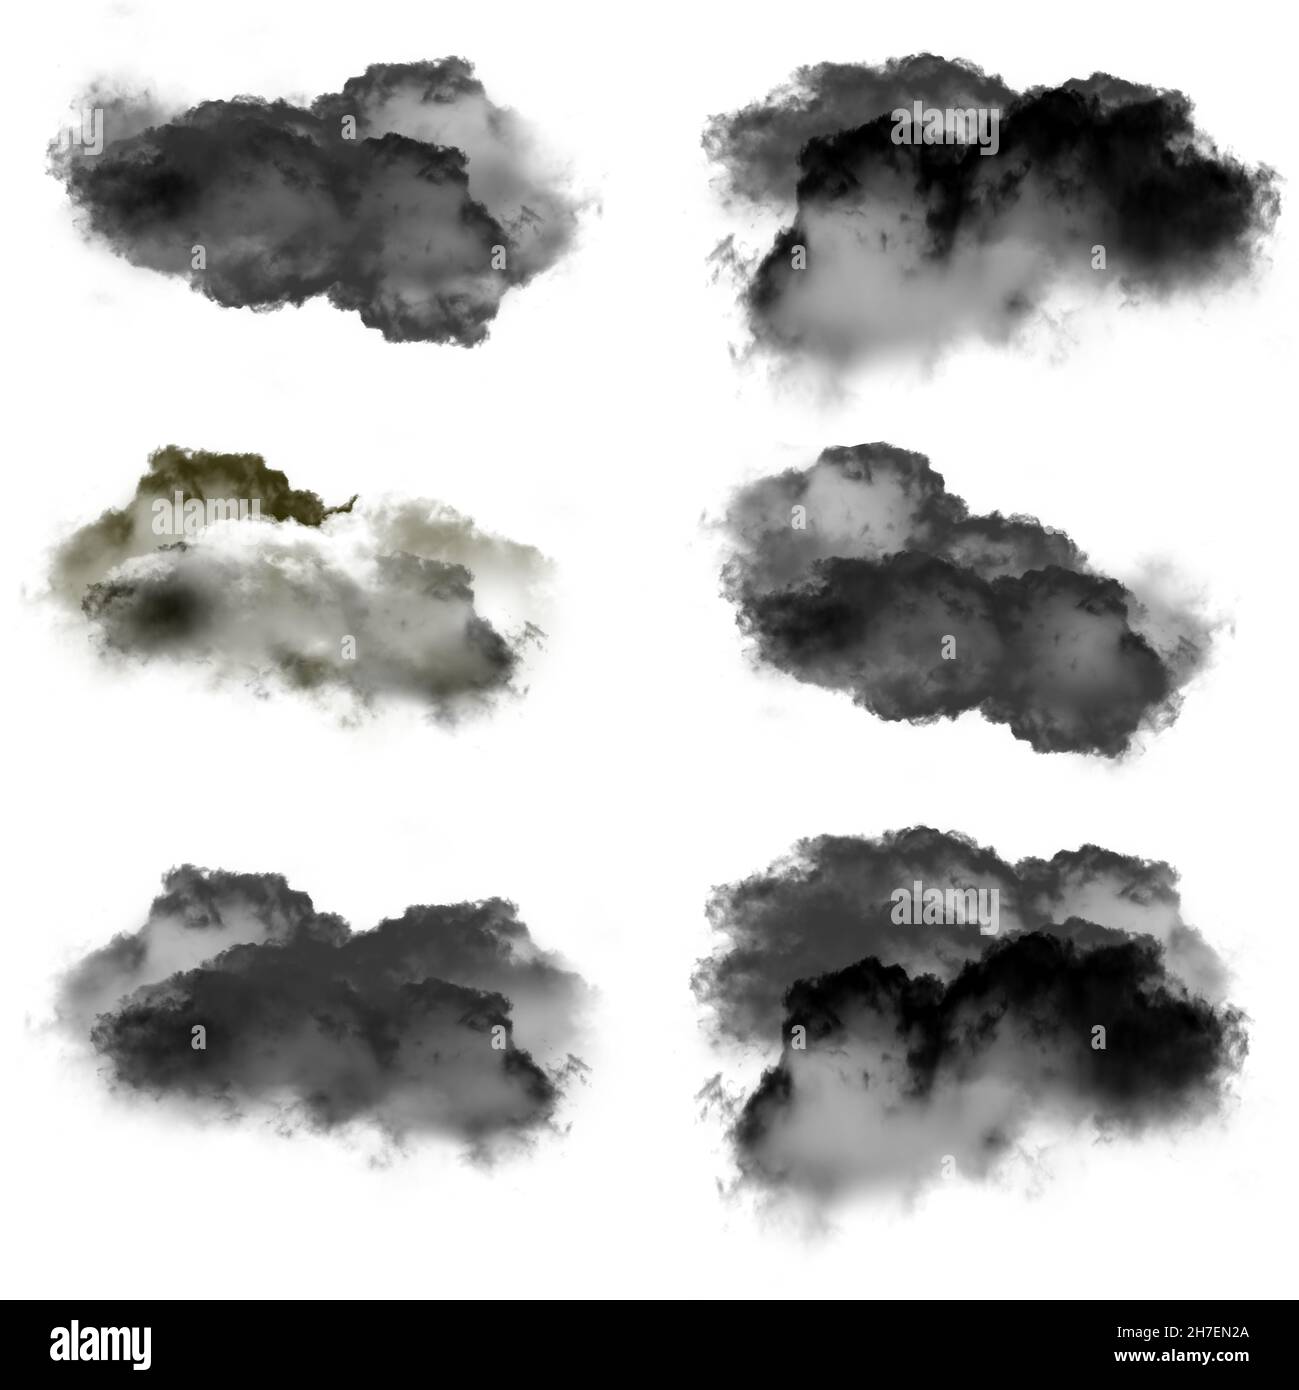 Black clouds of smoke isolated over white background 3D illustration, dirt or dust shapes collection, natural smoke from fire rendering Stock Photo